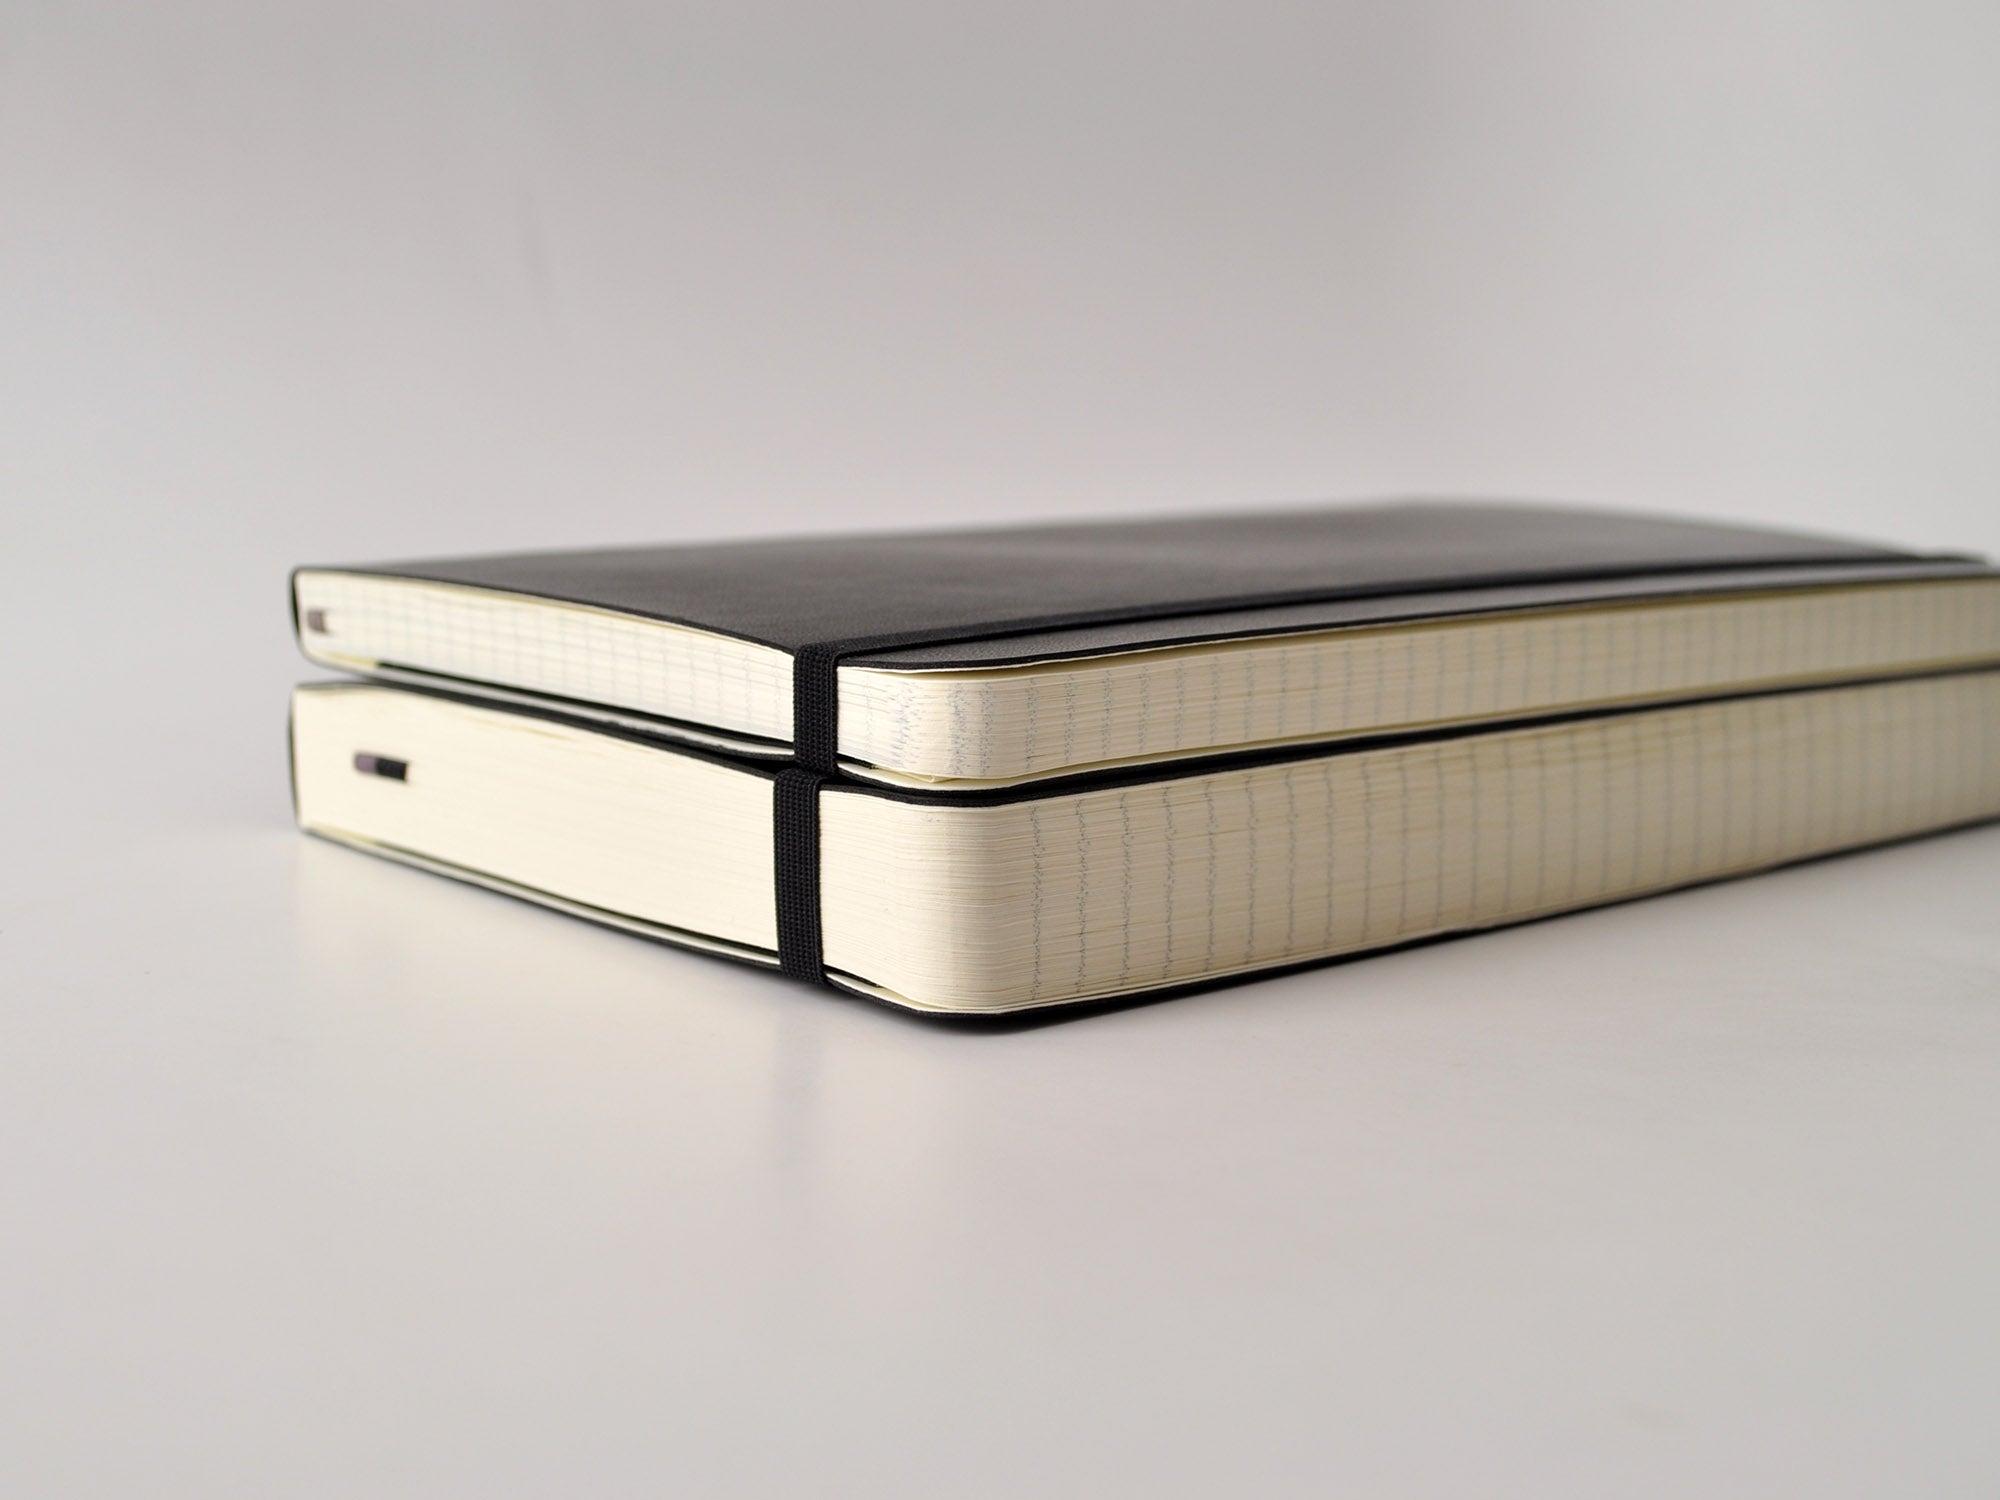 Moleskine, Classic Soft Cover Notebook Expanded, Ruled